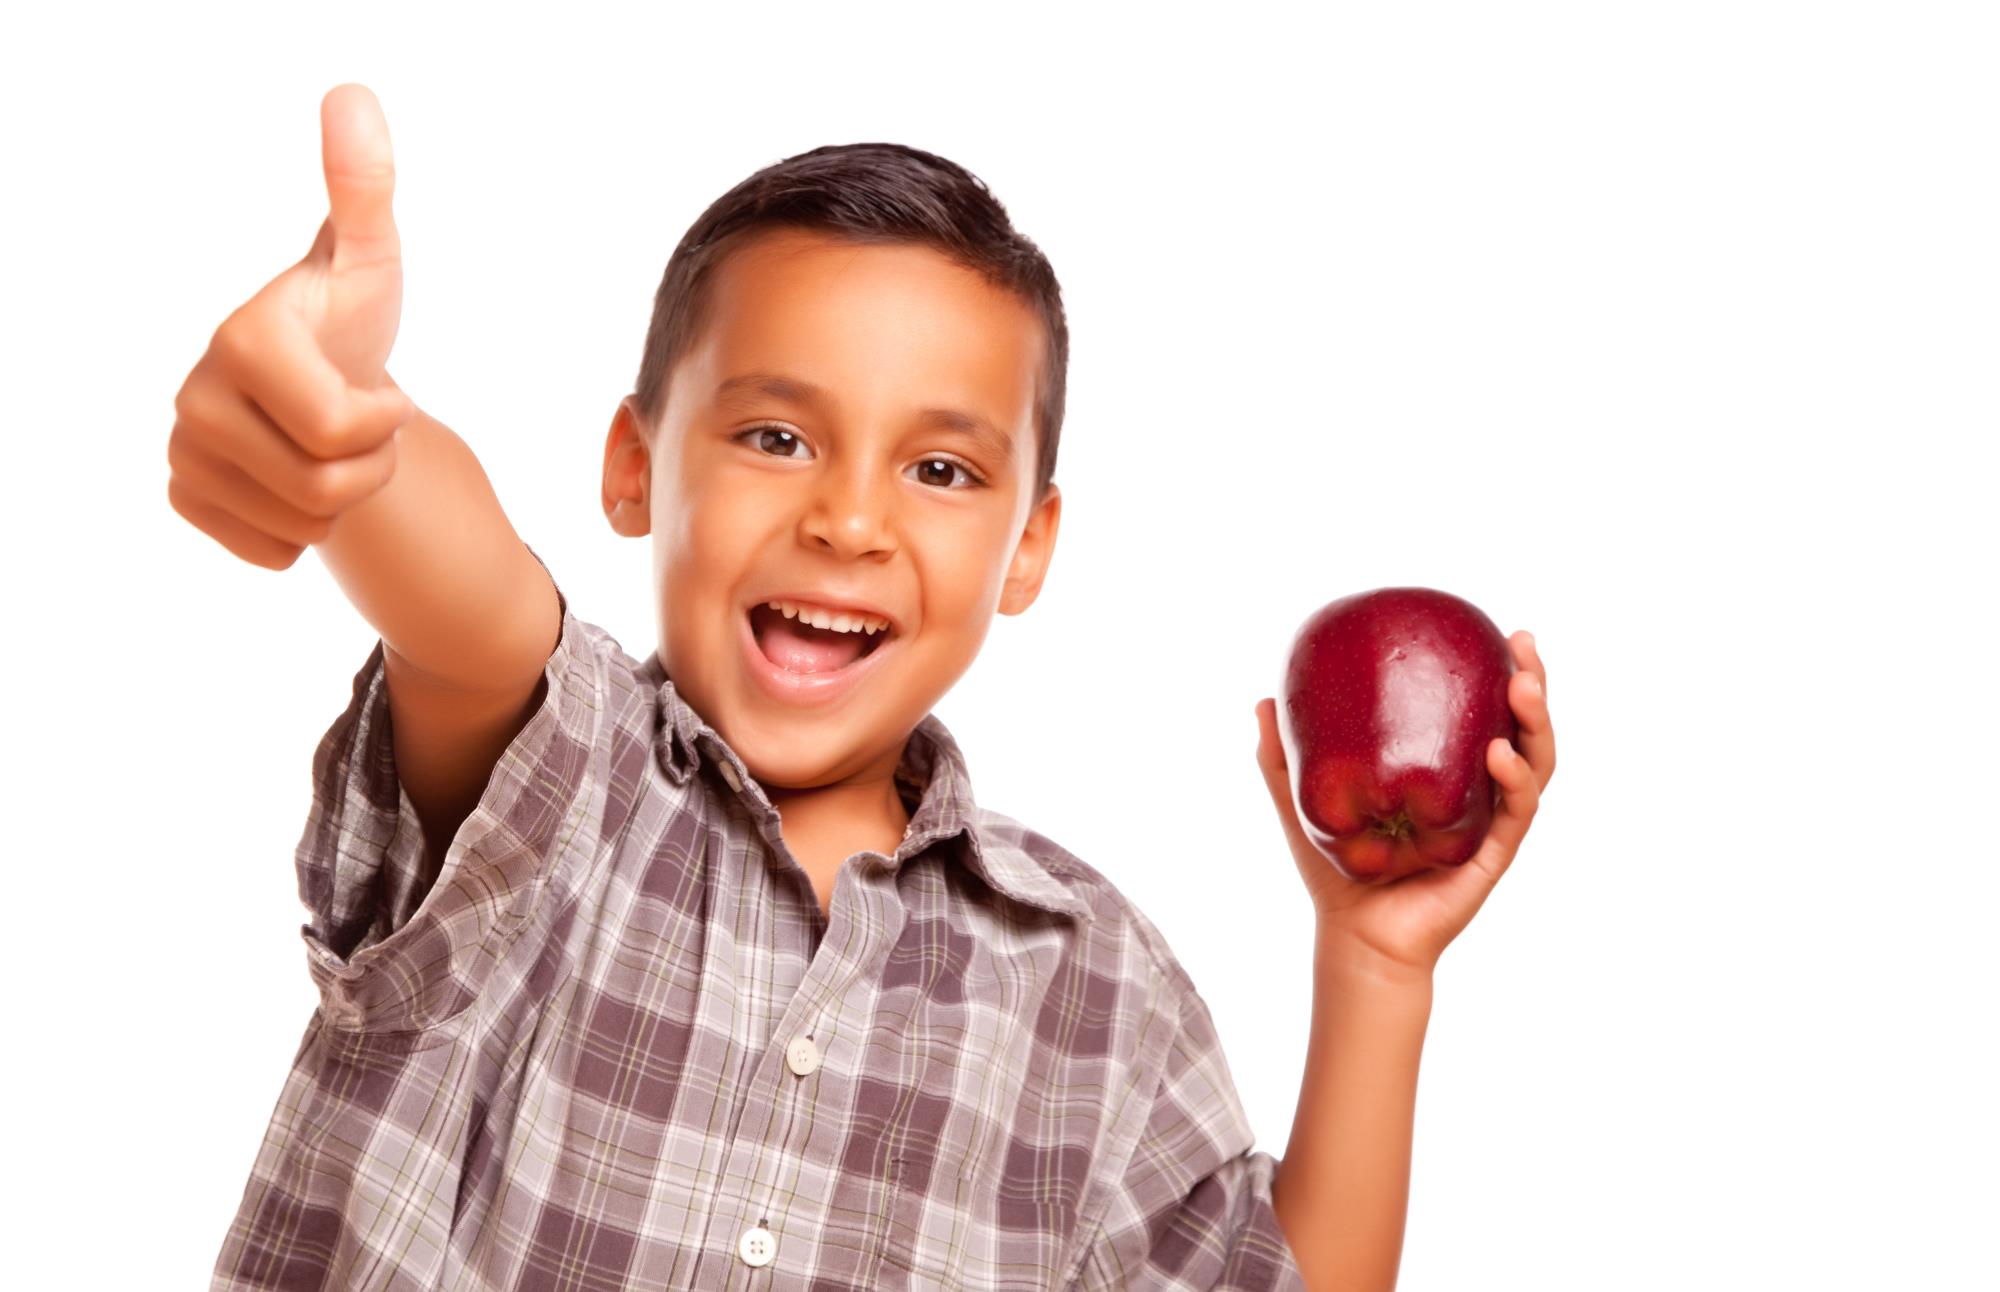 Child with thumbs up holding a red apple